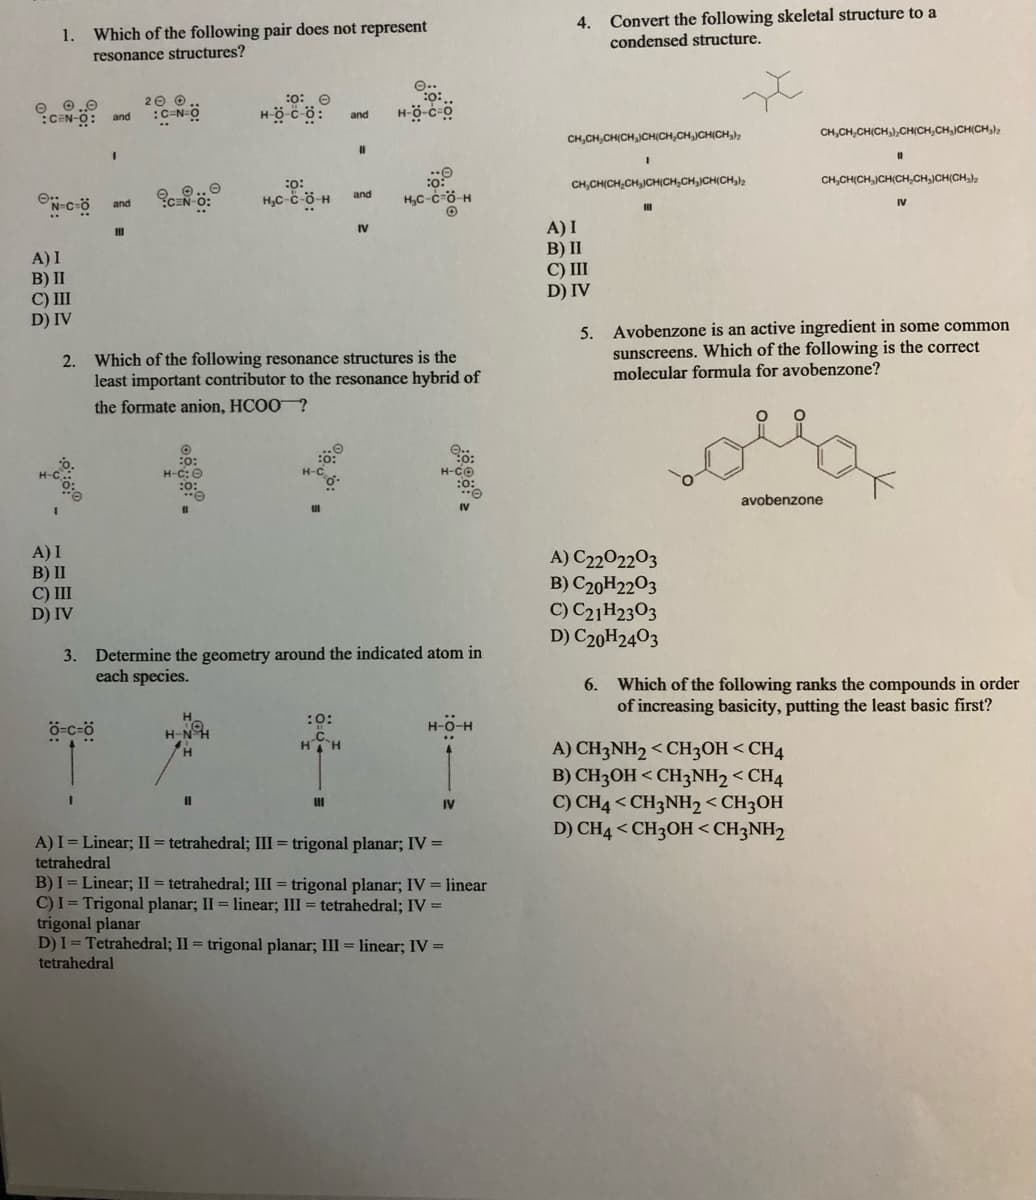 4.
Convert the following skeletal structure to a
1.
Which of the following pair does not represent
condensed structure.
resonance structures?
:0: 0
O 0.0
:CEN-O: and
20 0
:C-N-Ö
Höcö:
and
CH,CH,CH(CH,JCH(CH,CH,JCH(CH,)
CH,CH,CH(CH,),CH(CH,CH,JCH(CH,);
CH,CH(CH,CH,JCH(CH,CH,CH(CH,
CH,CH(CH JCH(CH,CH,)CH(CH,),
:o:
H,C-c-ö-H
and
H,C-c-ö-H
and
IV
A) I
B) II
C) III
D) IV
IV
A) I
B) II
C) III
D) IV
5. Avobenzone is an active ingredient in some common
sunscreens. Which of the following is the correct
molecular formula for avobenzone?
2. Which of the following resonance structures is the
least important contributor to the resonance hybrid of
the formate anion, HCOO?
:o:
4-C:0
H-CO
avobenzone
A) I
B) II
C) II
D) IV
A) C2202203
B) C20H2203
C) C21H2303
D) C20H2403
3. Determine the geometry around the indicated atom in
each species.
6. Which of the following ranks the compounds in order
of increasing basicity, putting the least basic first?
:0:
ö-c-ö
H-N
H-O-H
HH
A) CH3NH2 < CH3OH <CH4
B) CH3OH < CH3NH2 < CH4
C) CH4 < CH3NH2< CH3OH
D) CH4 < CH3OH<CH3NH2
IV
A) I = Linear; II = tetrahedral; III = trigonal planar; IV =
tetrahedral
B) I = Linear; II = tetrahedral; III = trigonal planar; IV = linear
C)I = Trigonal planar; II = linear; III = tetrahedral; IV =
trigonal planar
D)I= Tetrahedral; II = trigonal planar; III = linear; IV =
tetrahedral
